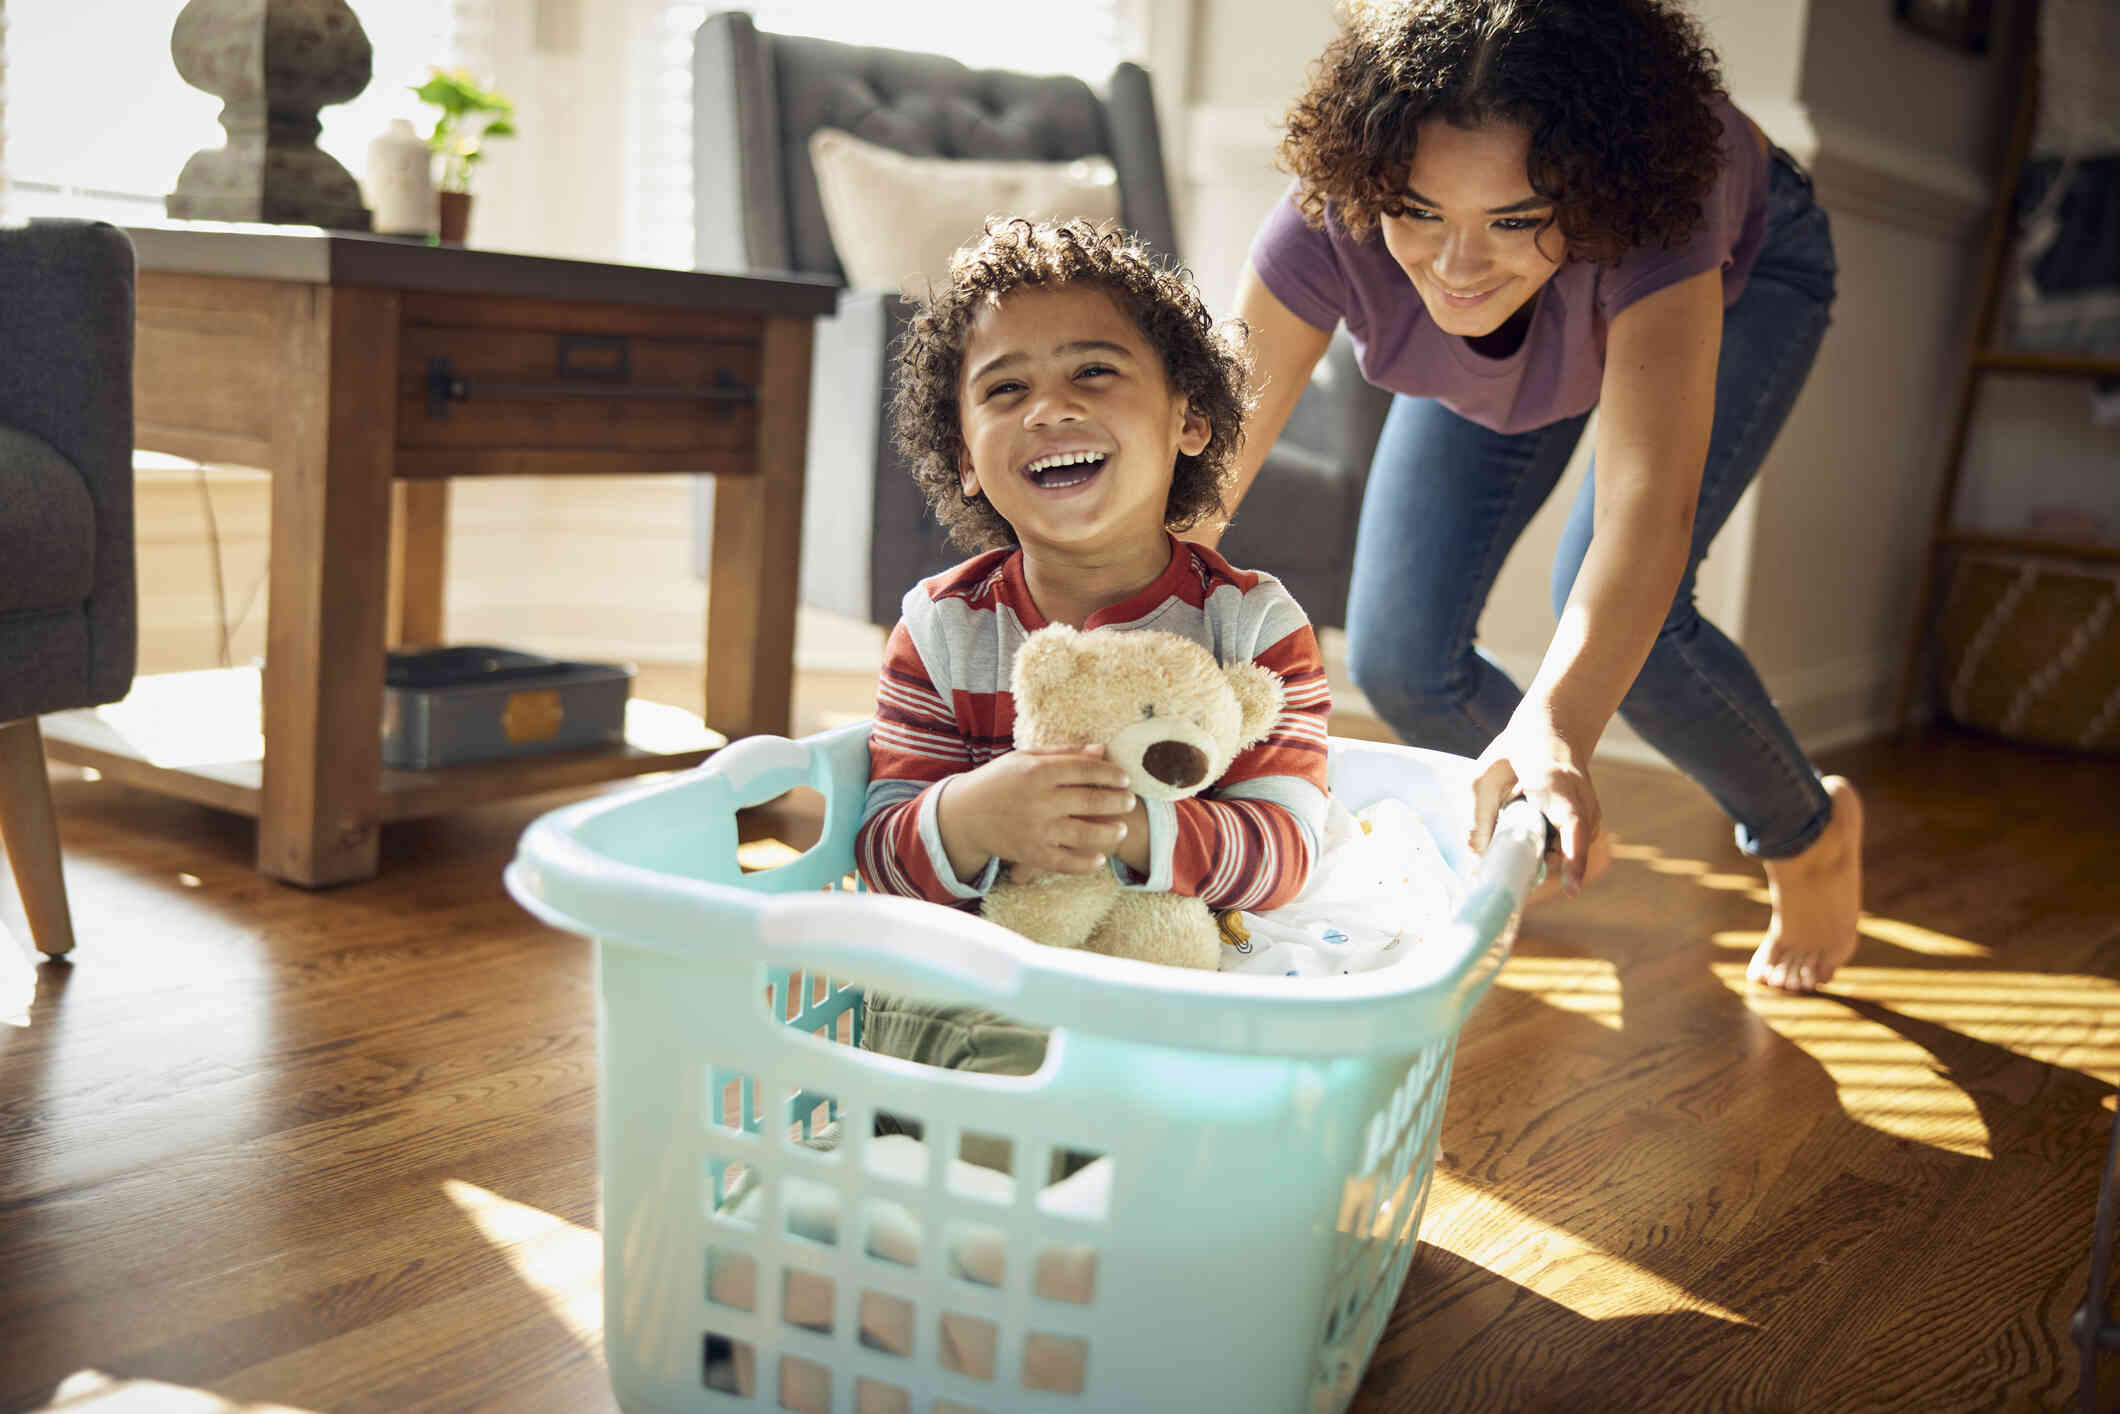 A little boy sits in a laundry basket and laughs as his mother pushed him around playfully across the floor.